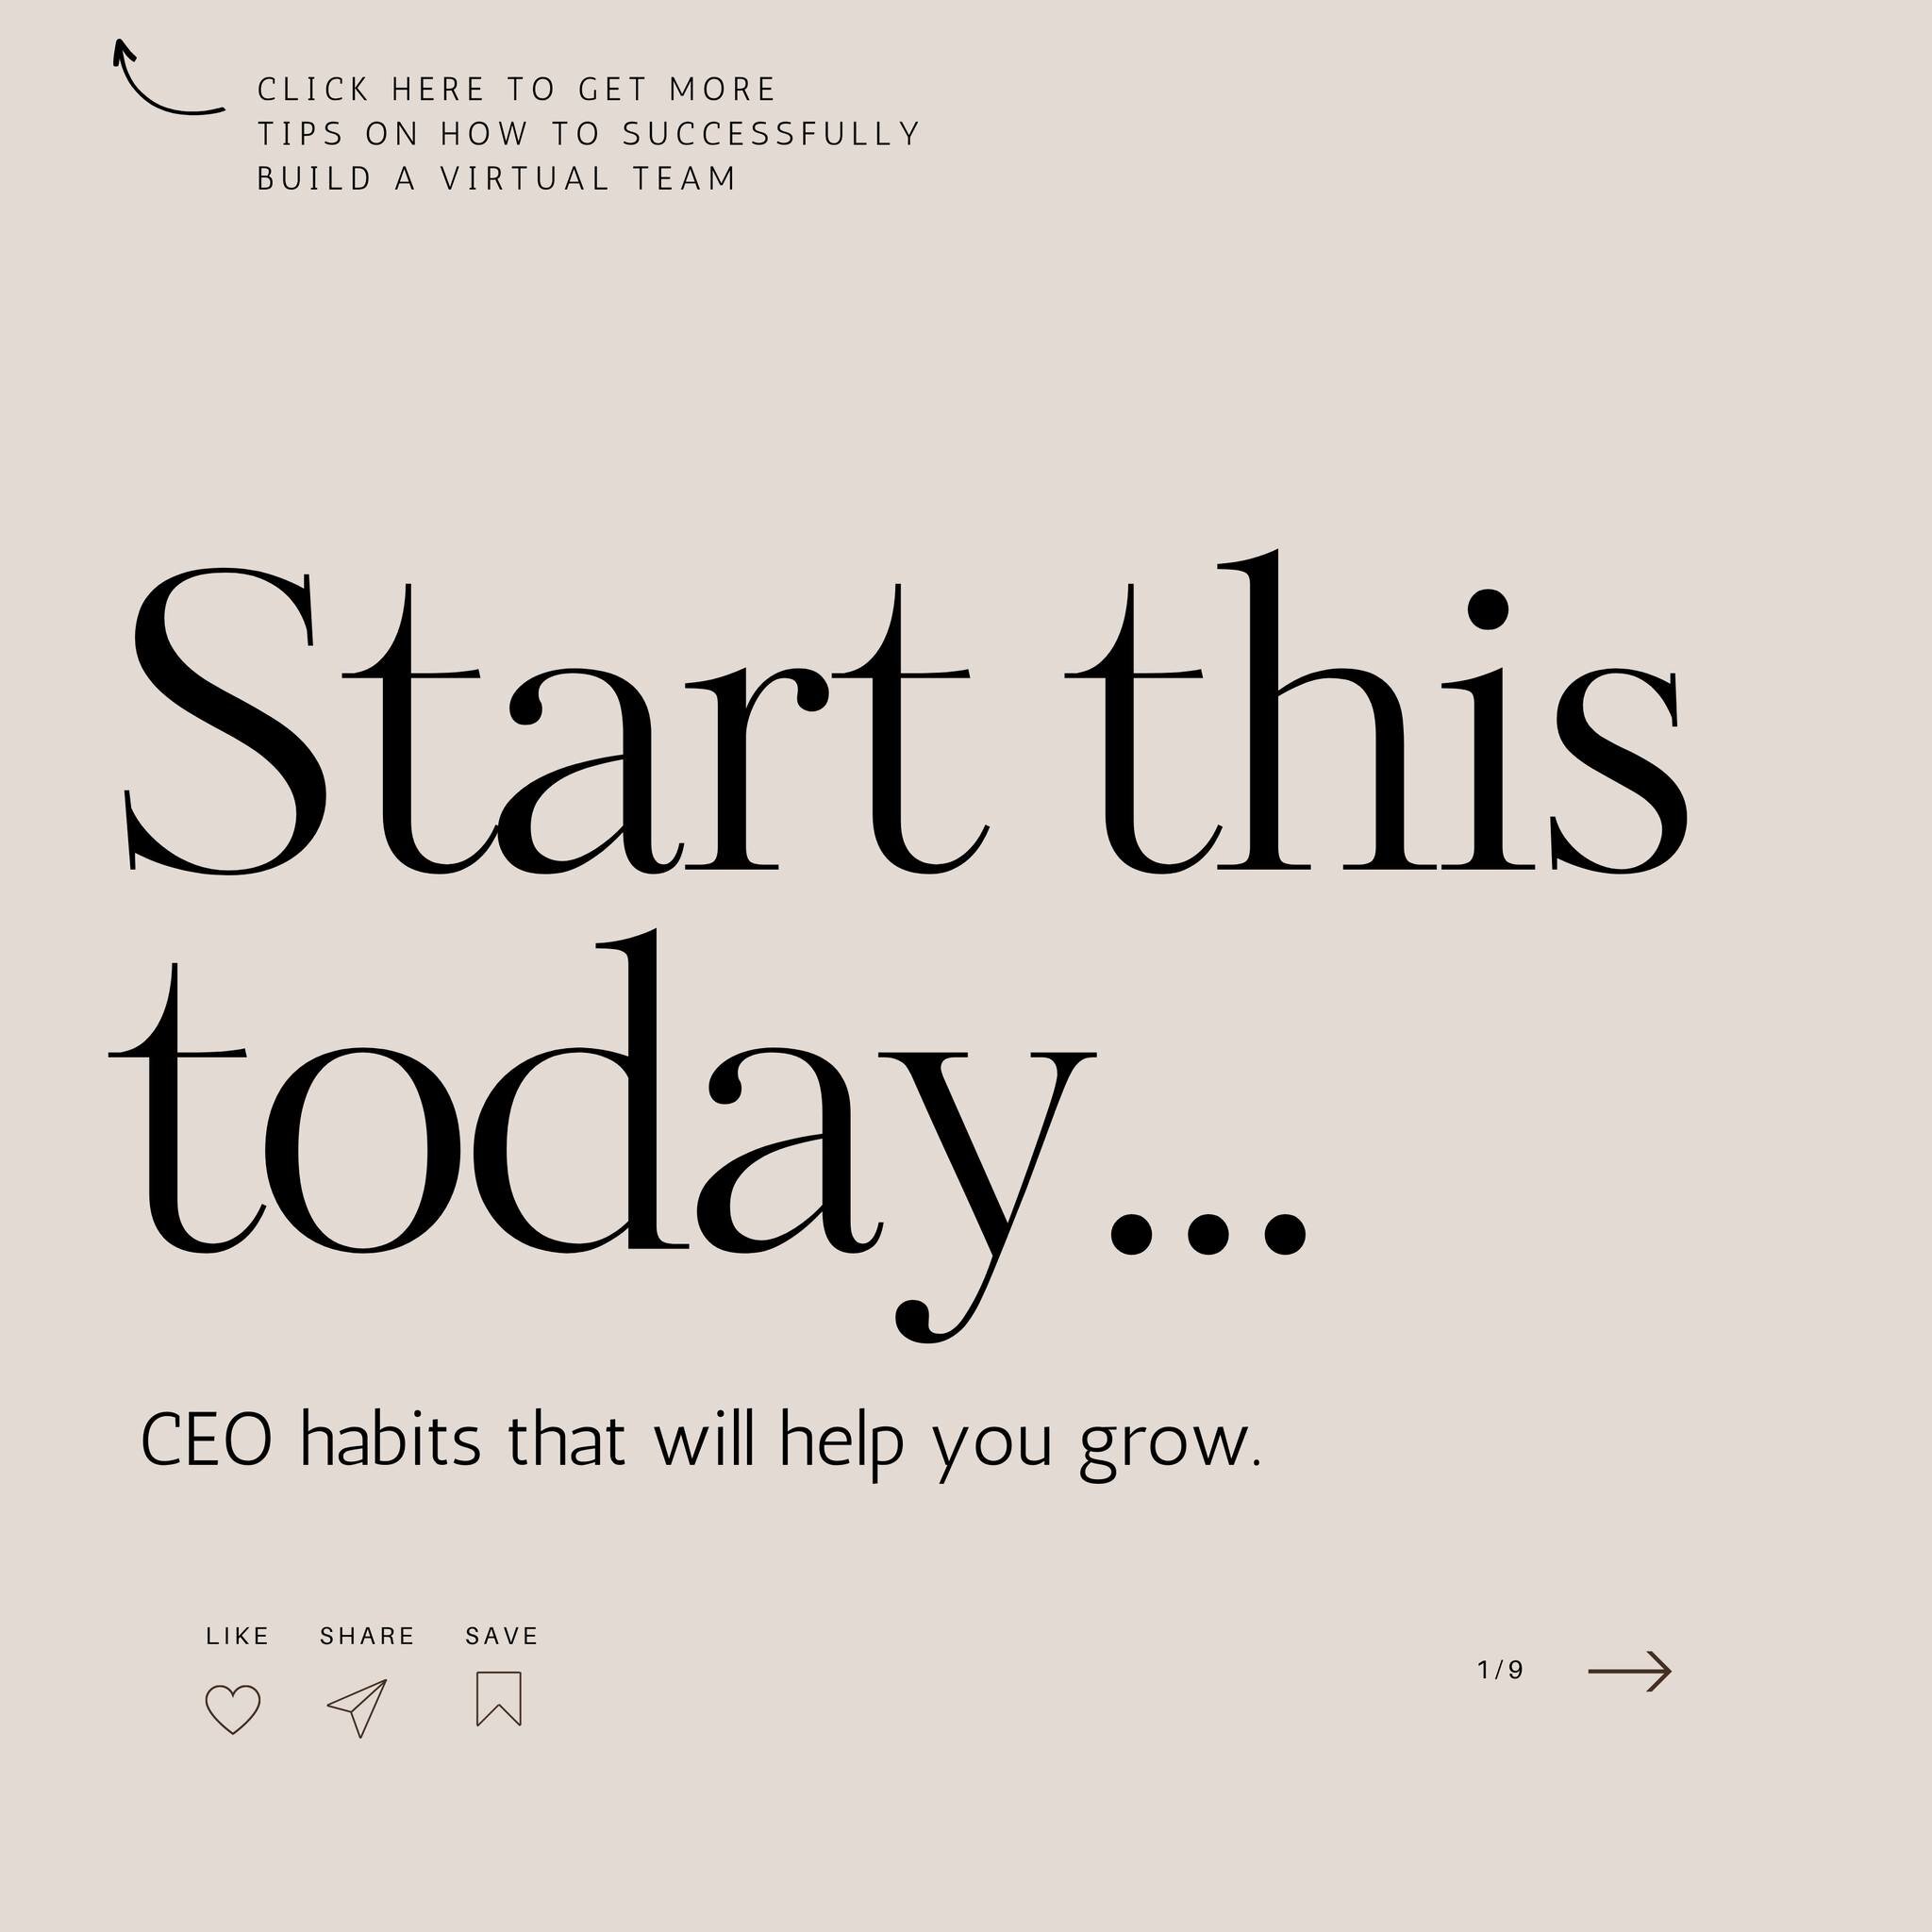 CEO habits that will help you grow 🔥 SAVE THIS FOR LATER. 

I know you want to run a successful, sustainable and scalable business.

As of today, here is what I suggest that you do👇👇

Every time you complete an ongoing project or task, you will do